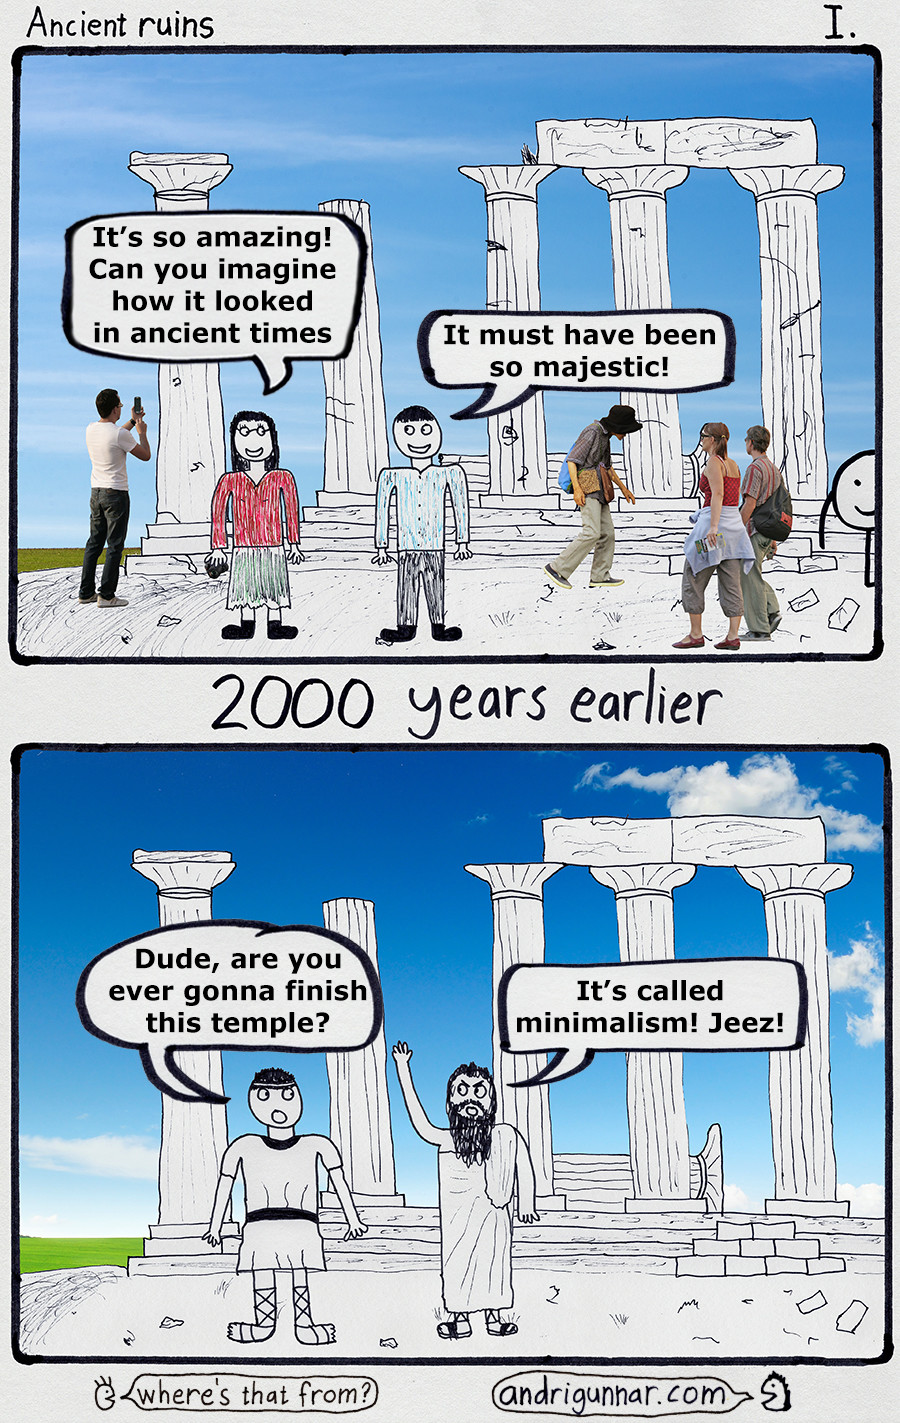 How ancient ruins look when they are new. Just started a webcomic. If you want to see more check out www.andrigunnar.com ... oh wait, this is my first comic.. I